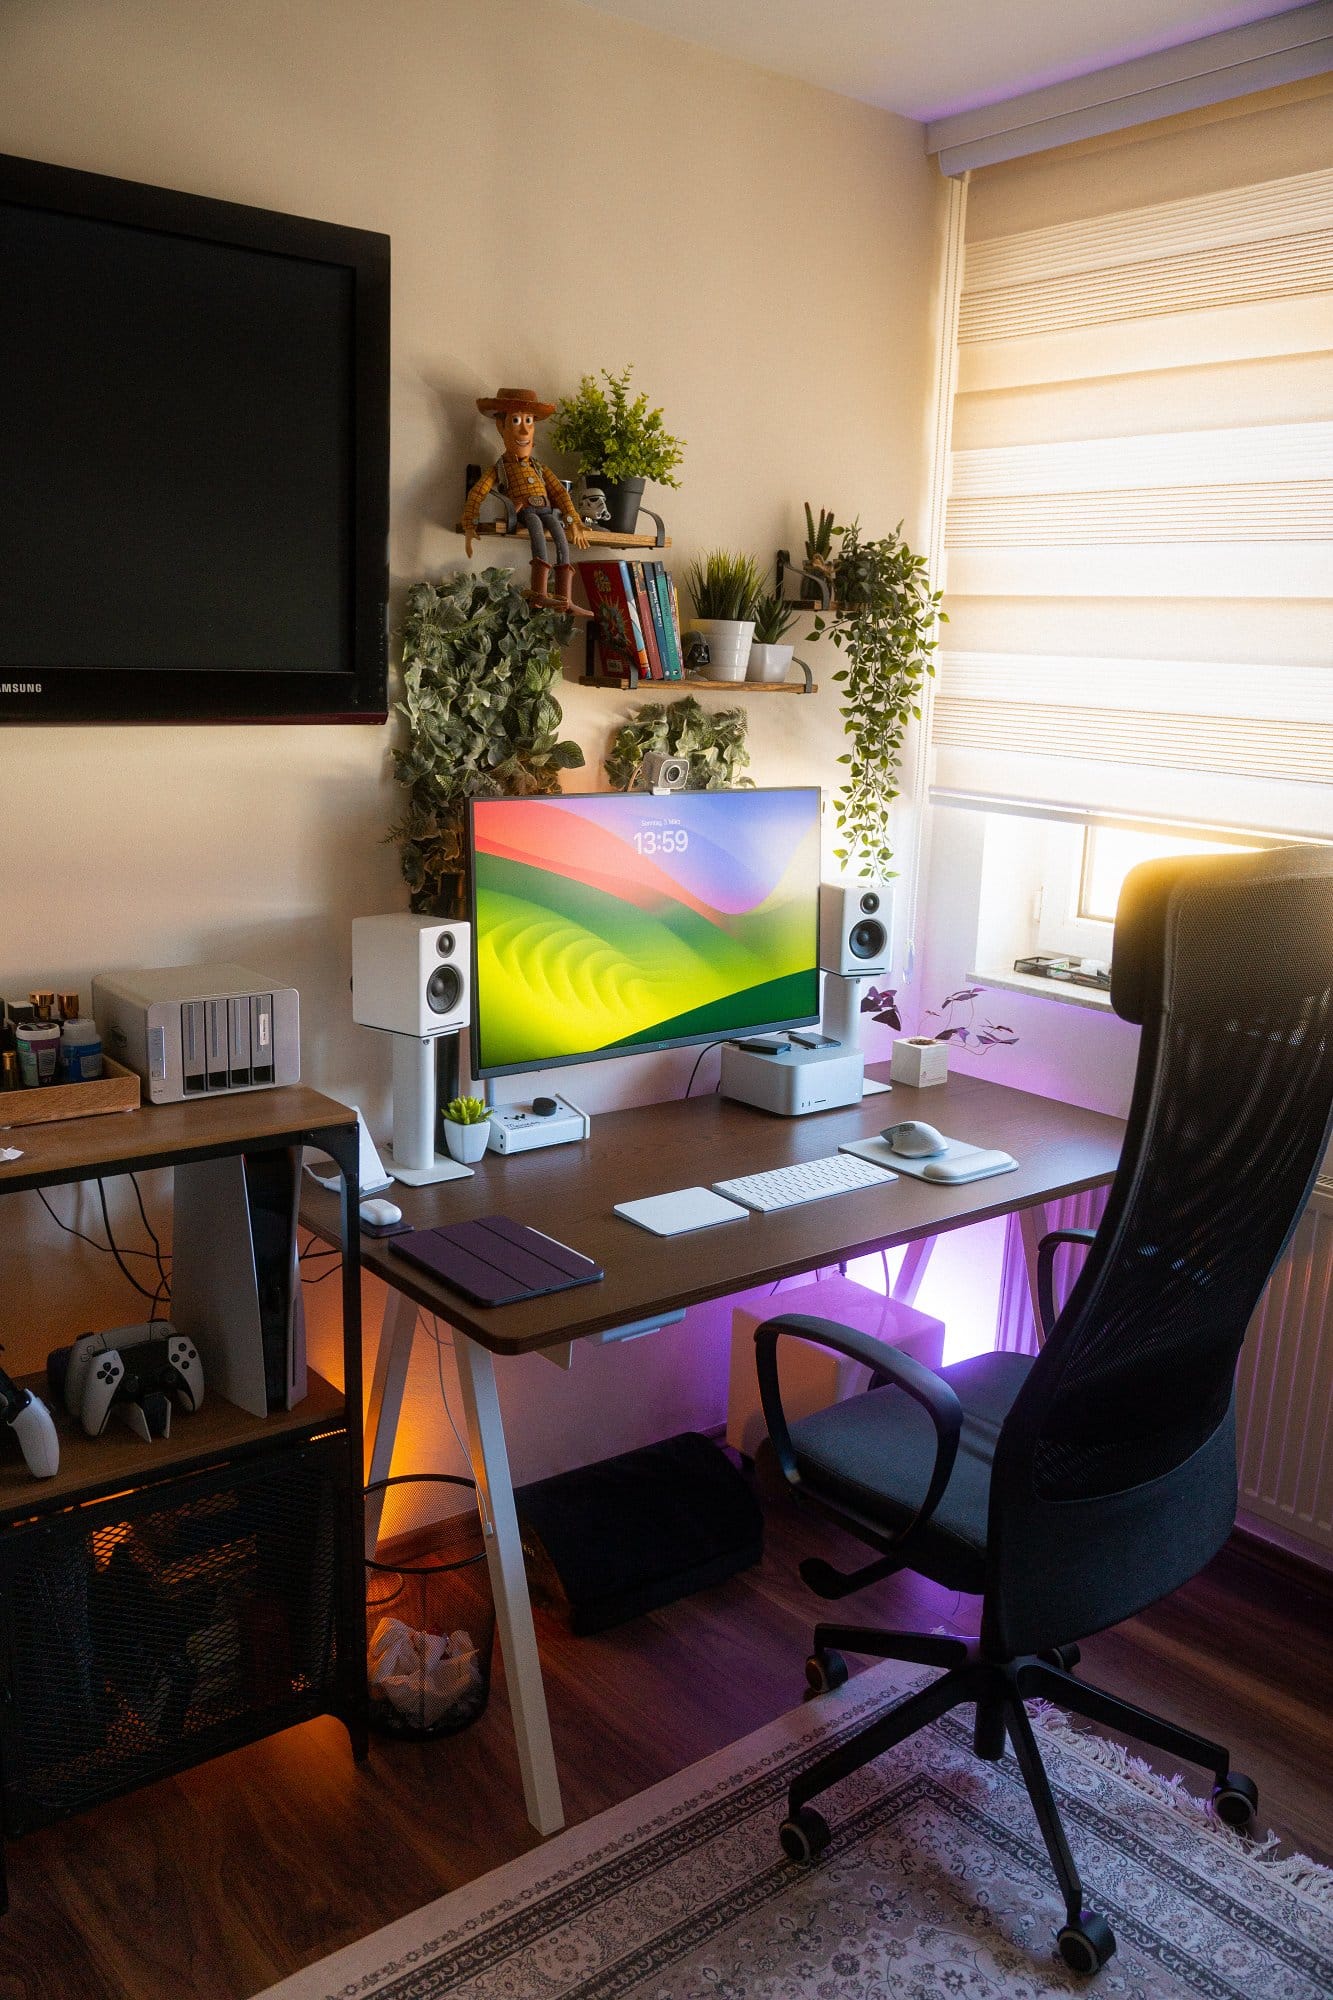 A well-lit home office with a desk, ergonomic chair, computer setup with monitor, houseplants, and a TV mounted on the wall